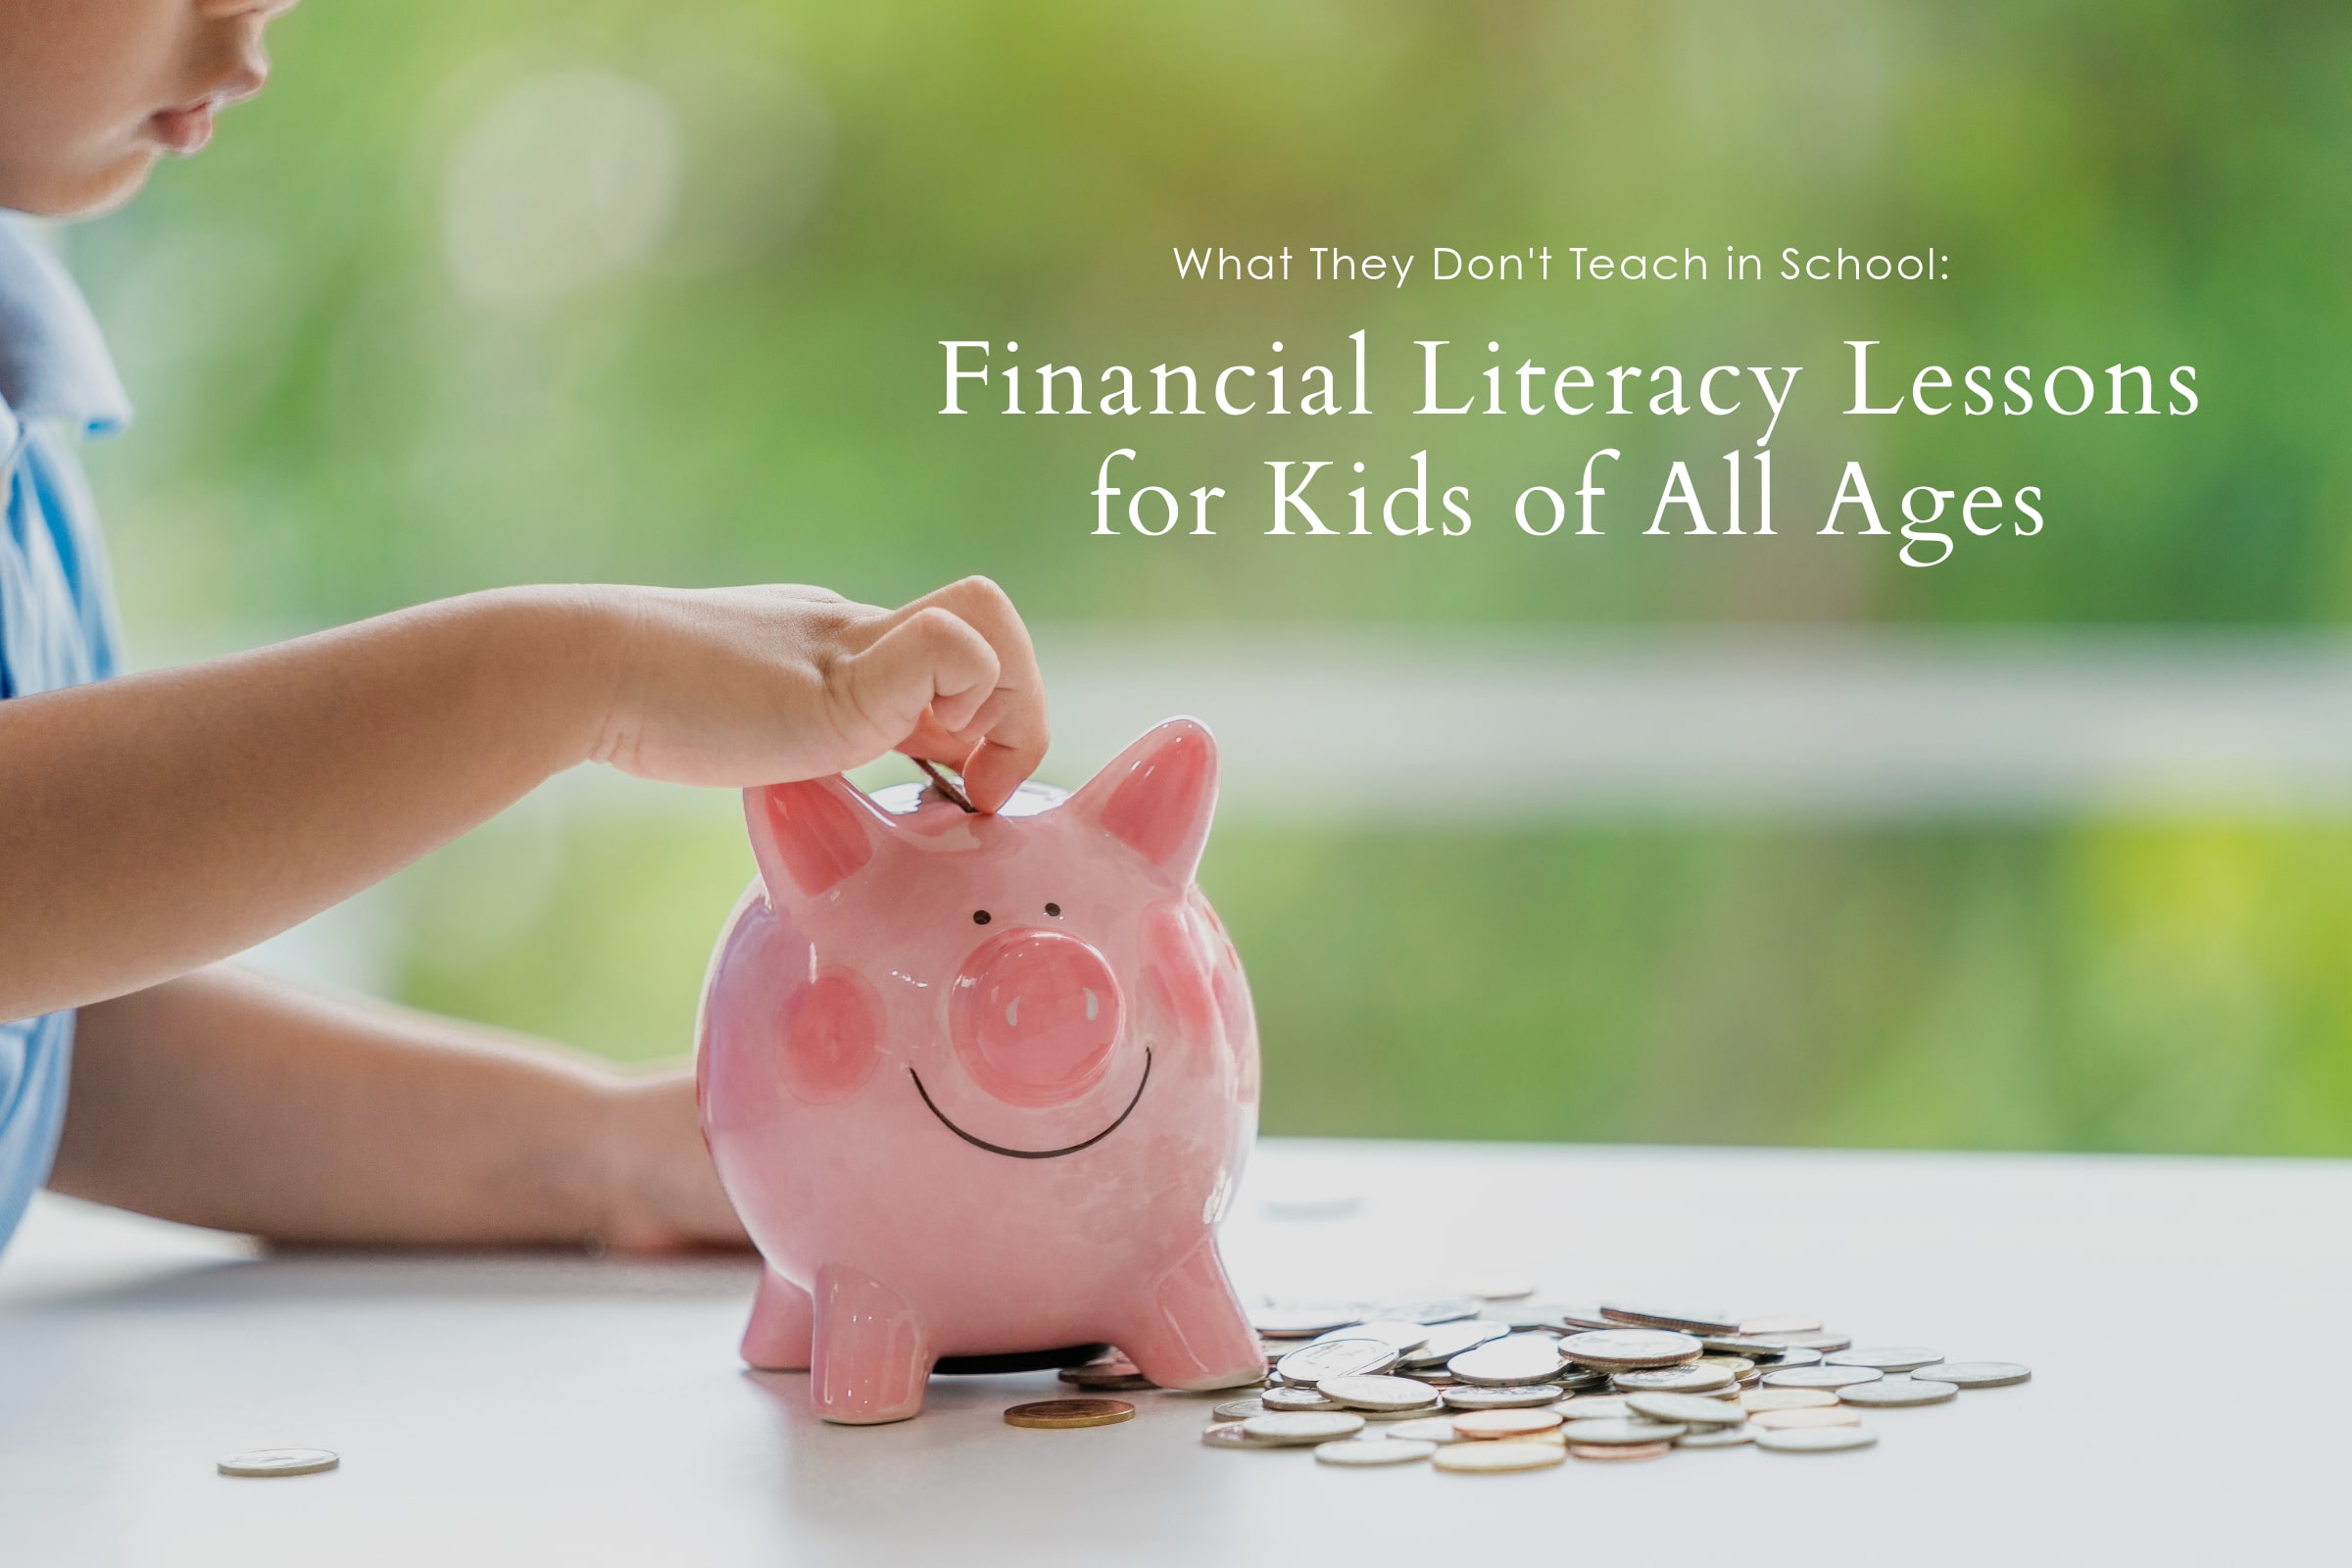 Financial Literacy Lessons for Kids of All Ages